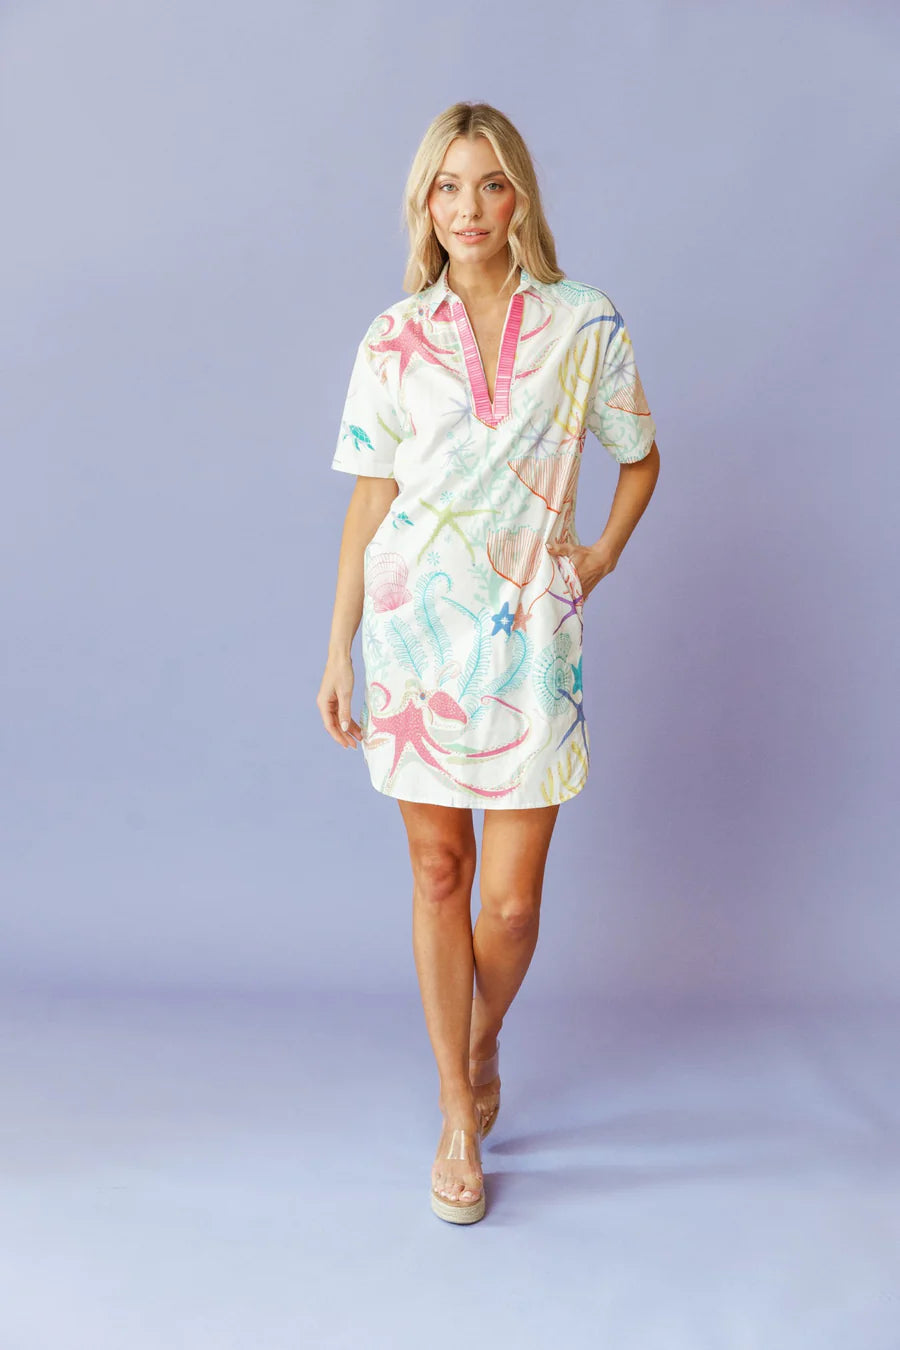 Sheridan French  Rhodes Dress - Under the Sea White